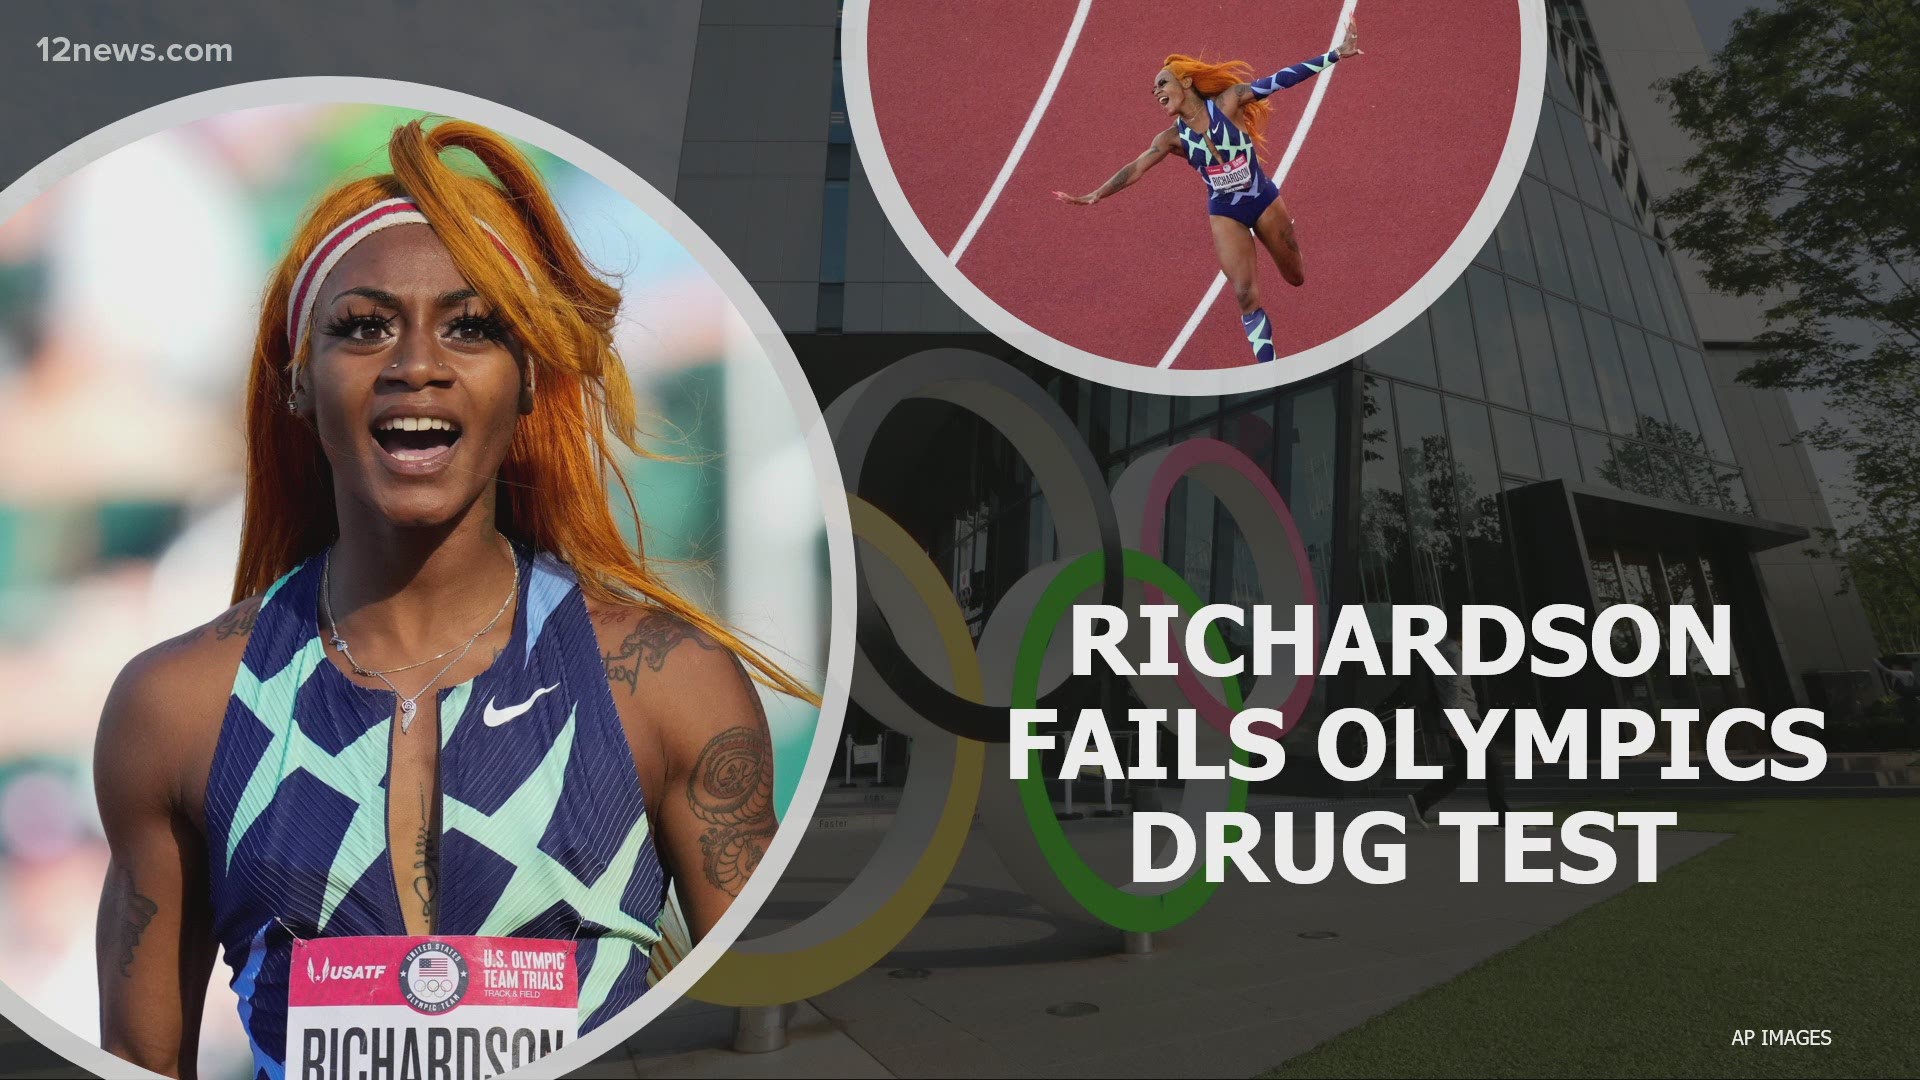 Do you think the Olympics should remove cannabis from its banned substance list? Ryan Cody discusses the story.